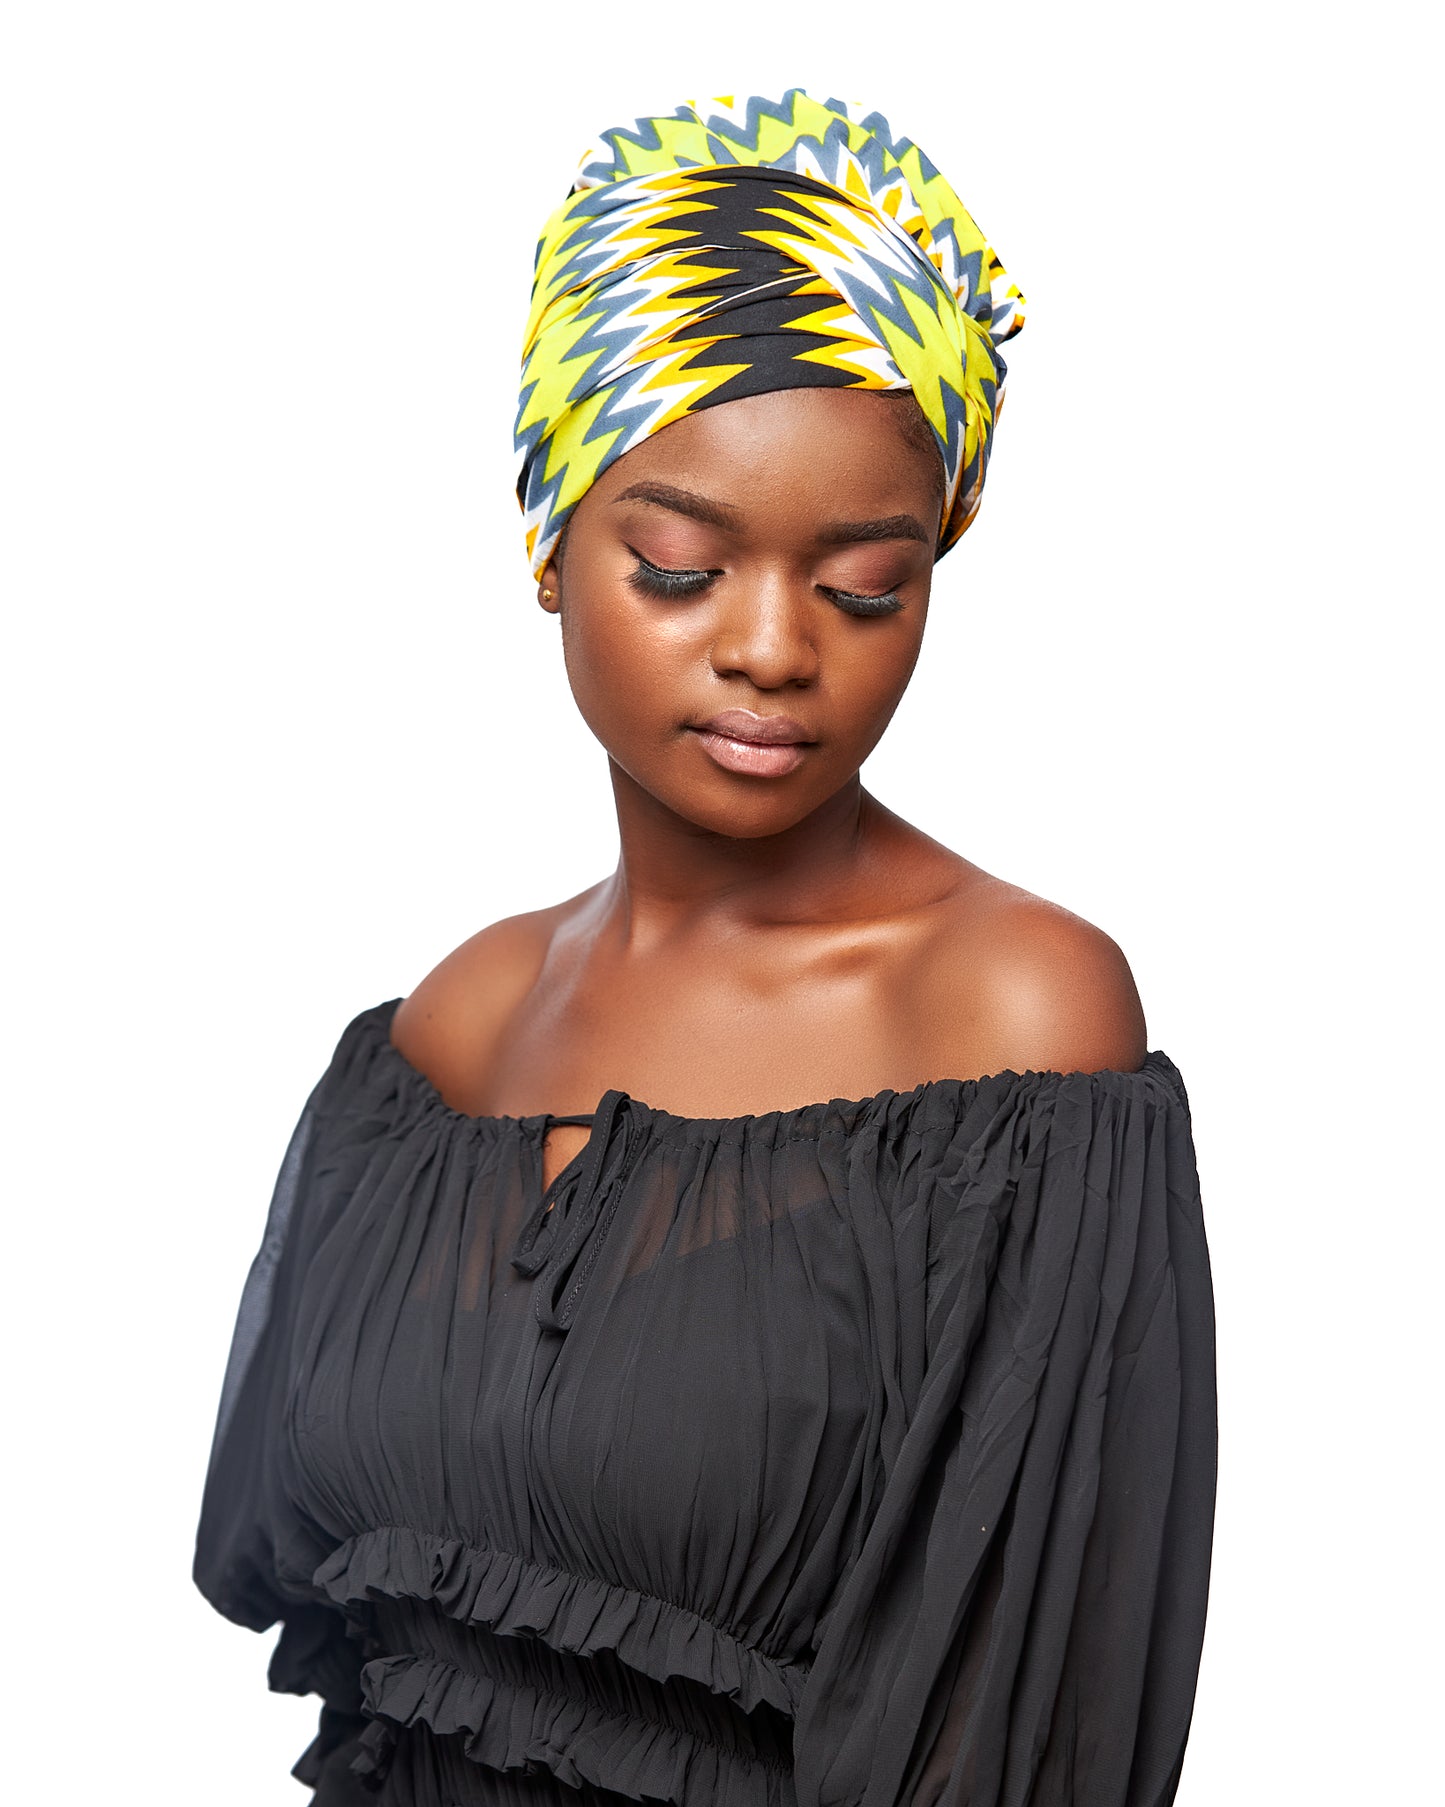 Ghanaian Kente Wax Print Made of Yellow, Gold ,Ash ,Black and White Blended Beautiful Colours And Pattern, Hand Made Elastic Silklined Bonnet With Band